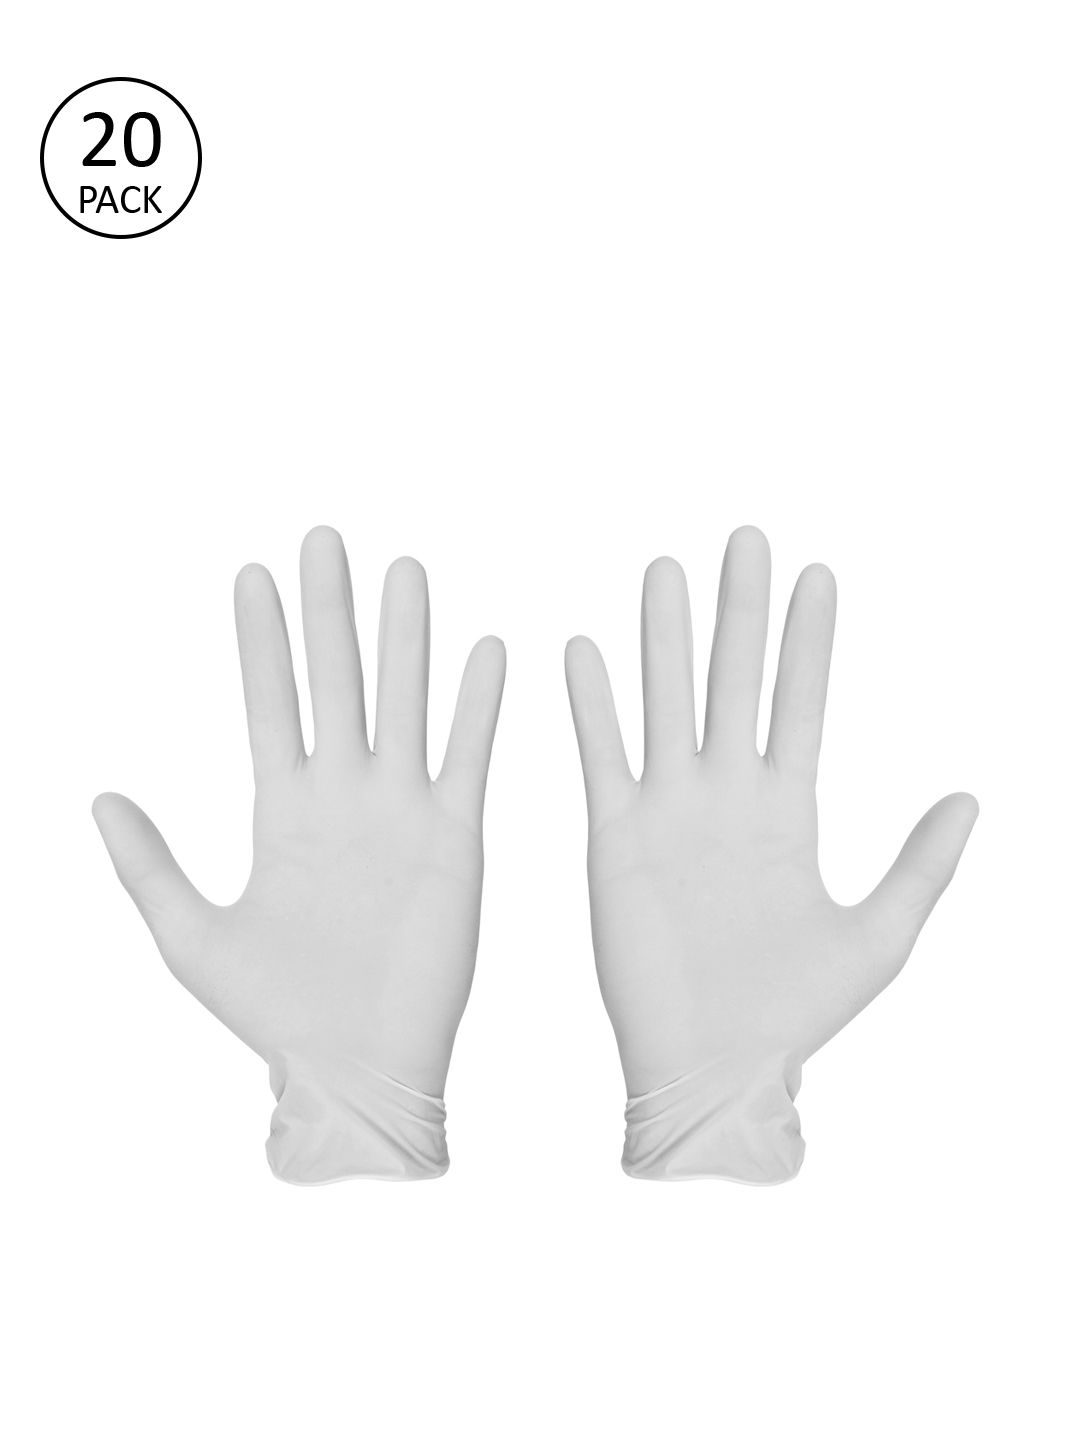 LONDON FASHION hob Unisex Pack Of 20 Solid Surgical Disposable Hand Gloves Price in India